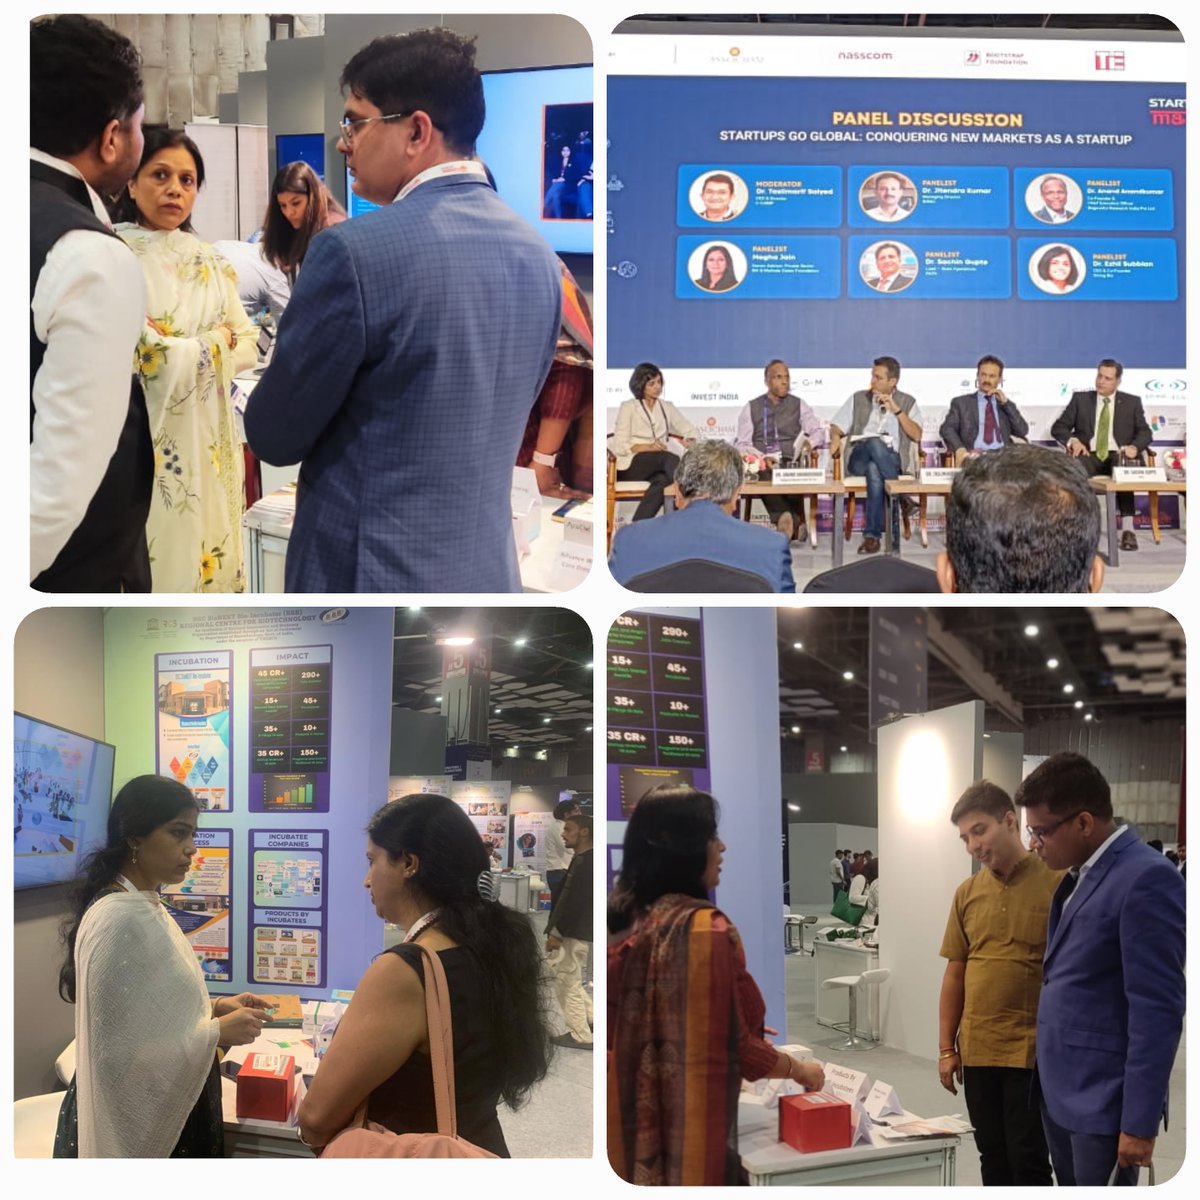 BBB_BSC BioNEST Bio-Incubator, Regional Centre for Biotechnology, along with dynamic startups at the prestigious Startup MahaKumbh event in Bharat Mandapam! #startupmahakumbh #BBBAtStartupMahaKumbh #innovatetoelevate